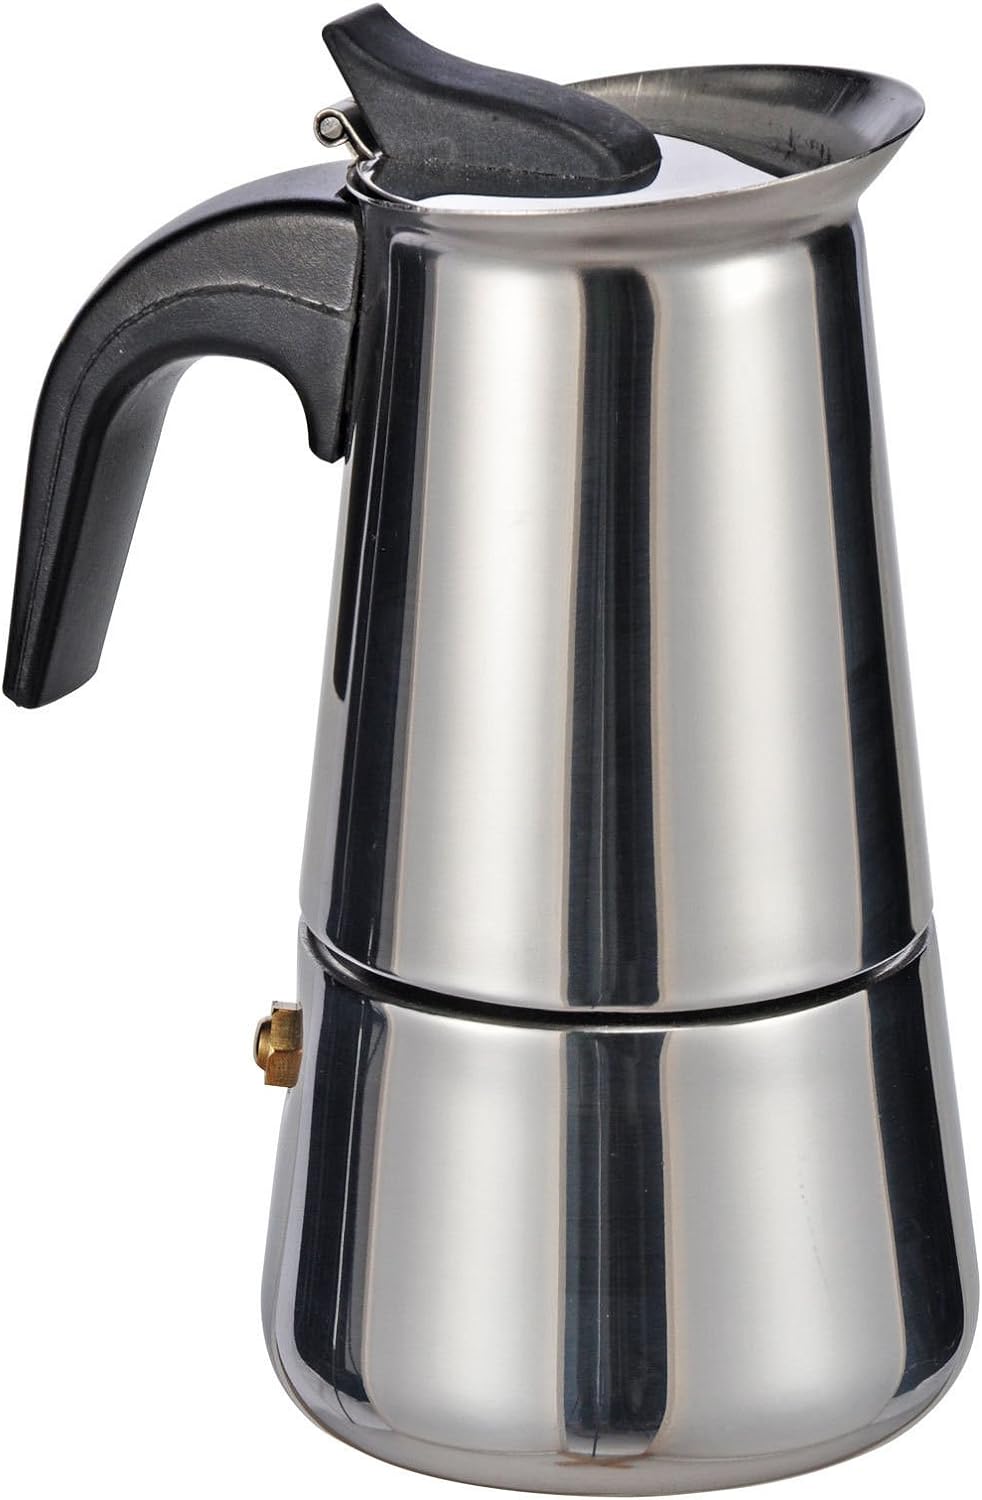 Budget International Stainless Steel Espresso Maker for 2 Cups Espresso with Plastic Handle 14072